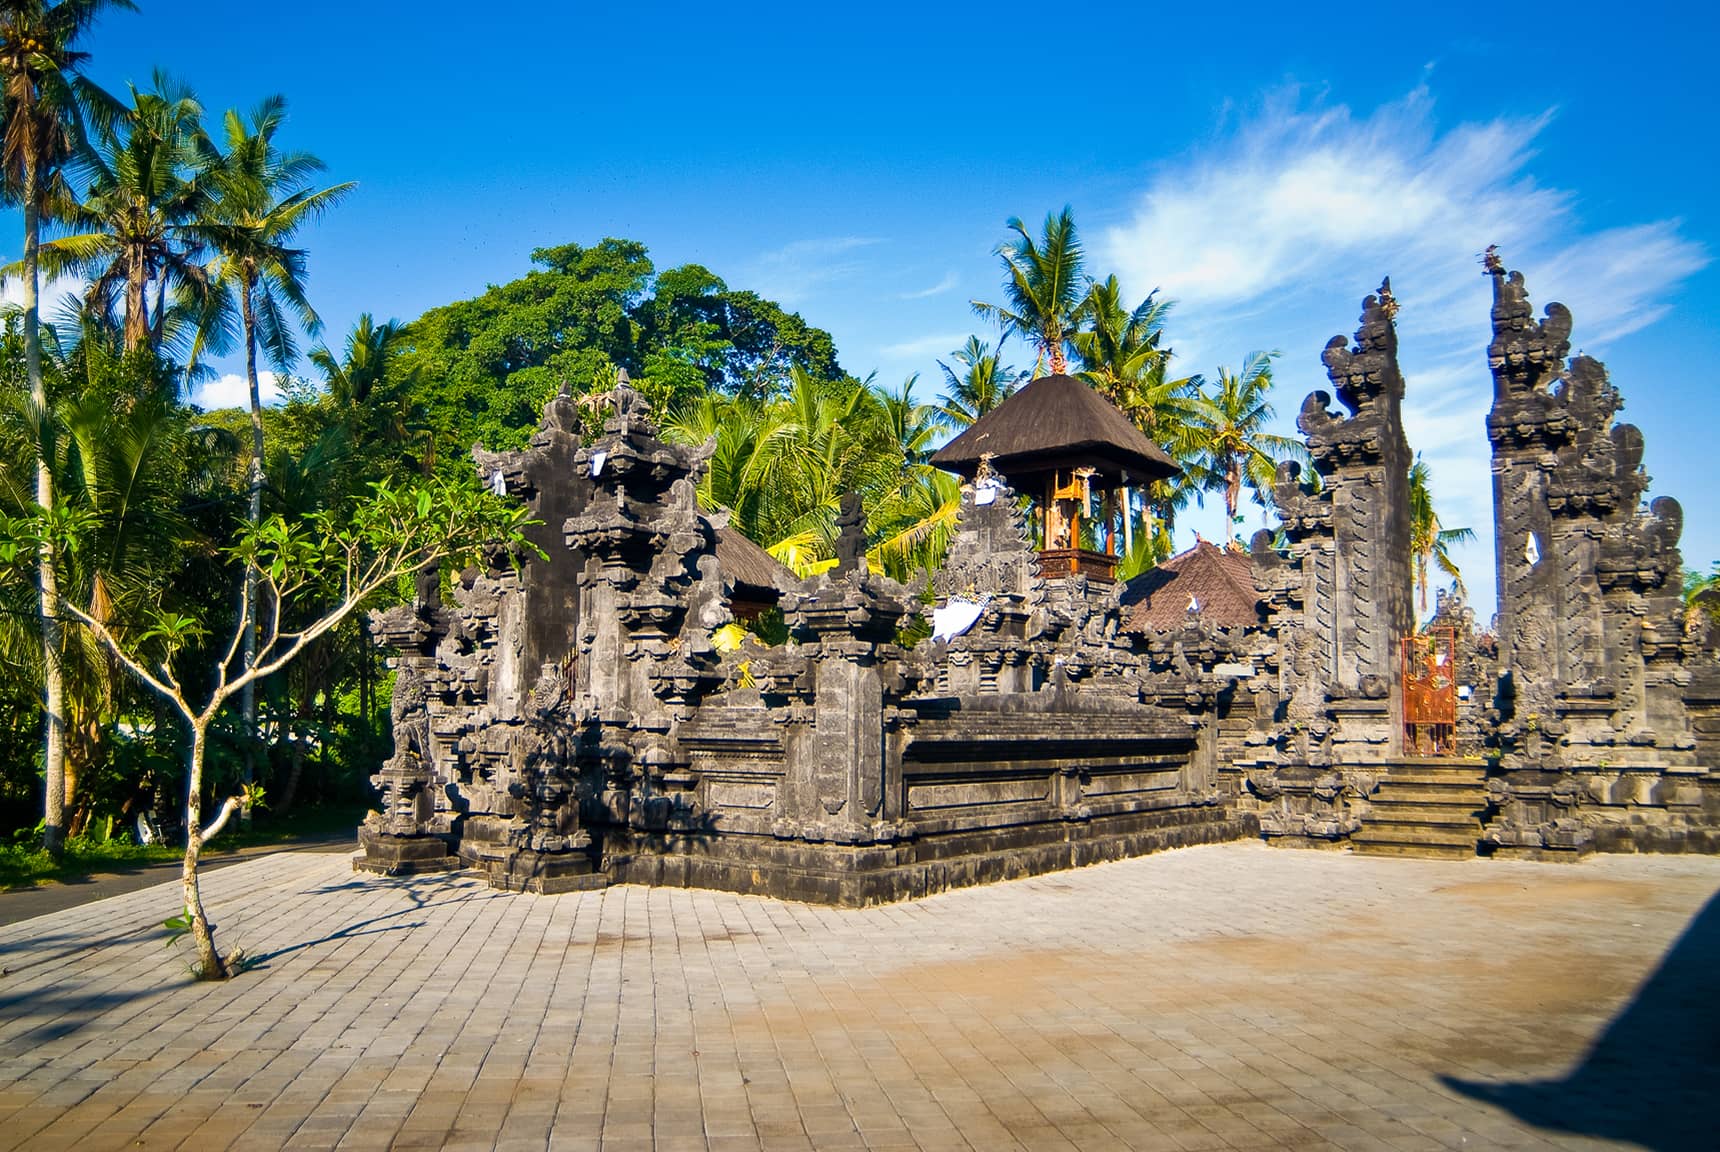 Professional photos of Hindu temples in Bali - temple are in Cemagi